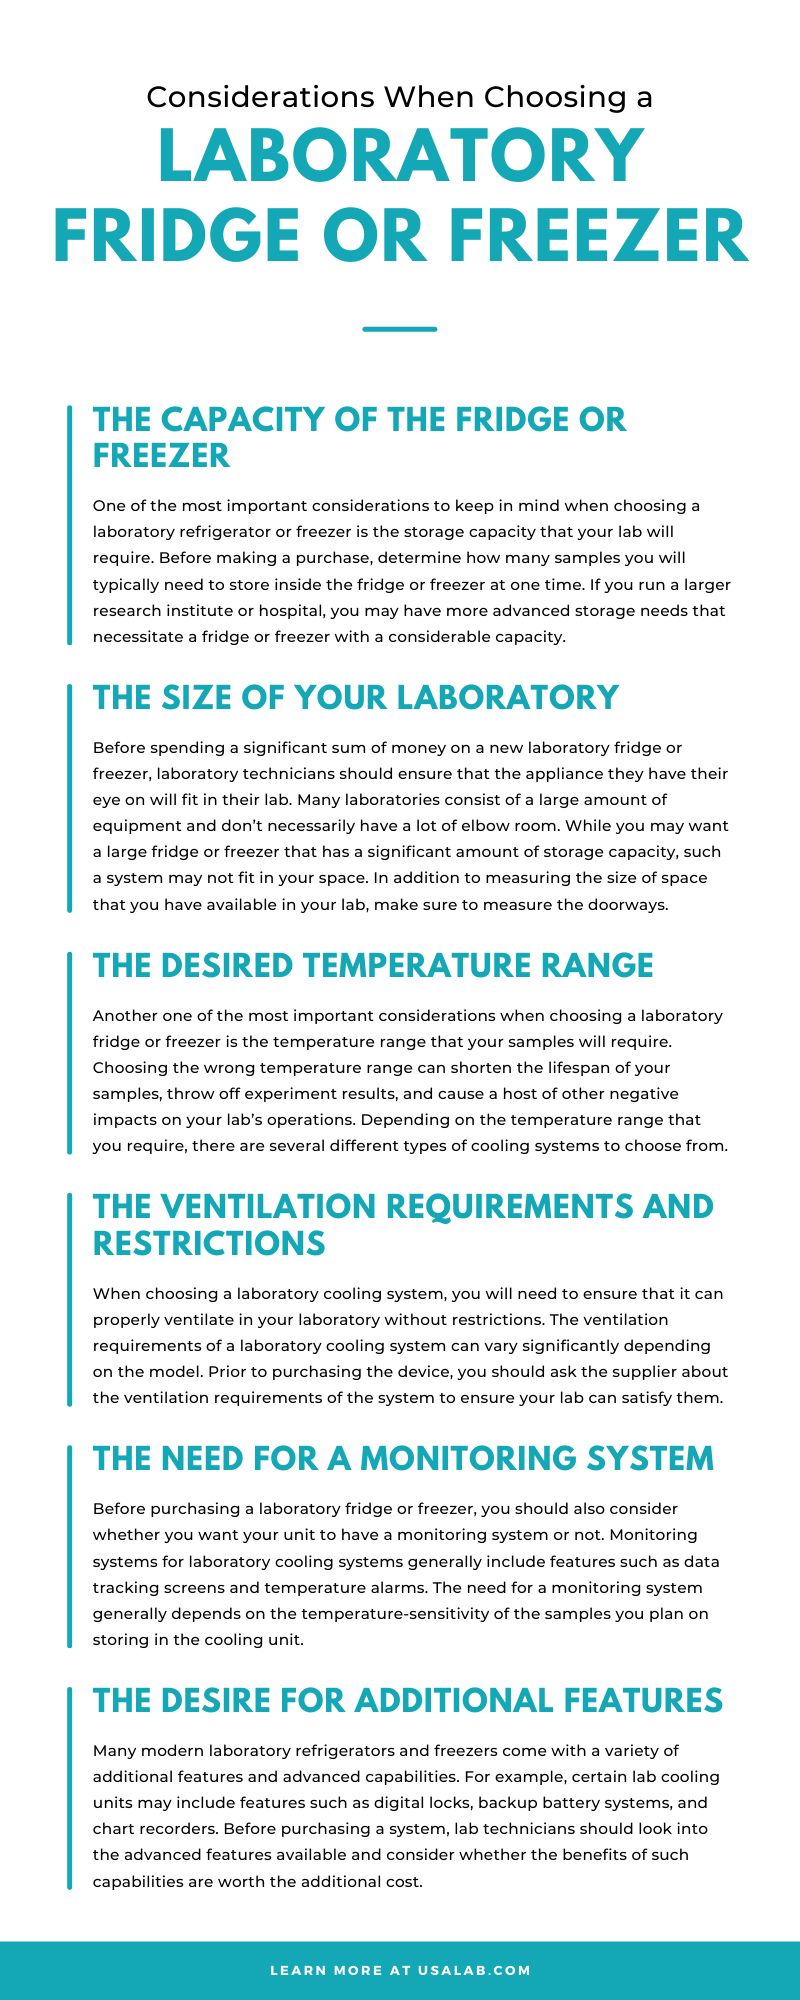 How Should Freezer and Fridge Temperatures be Monitored for Research?